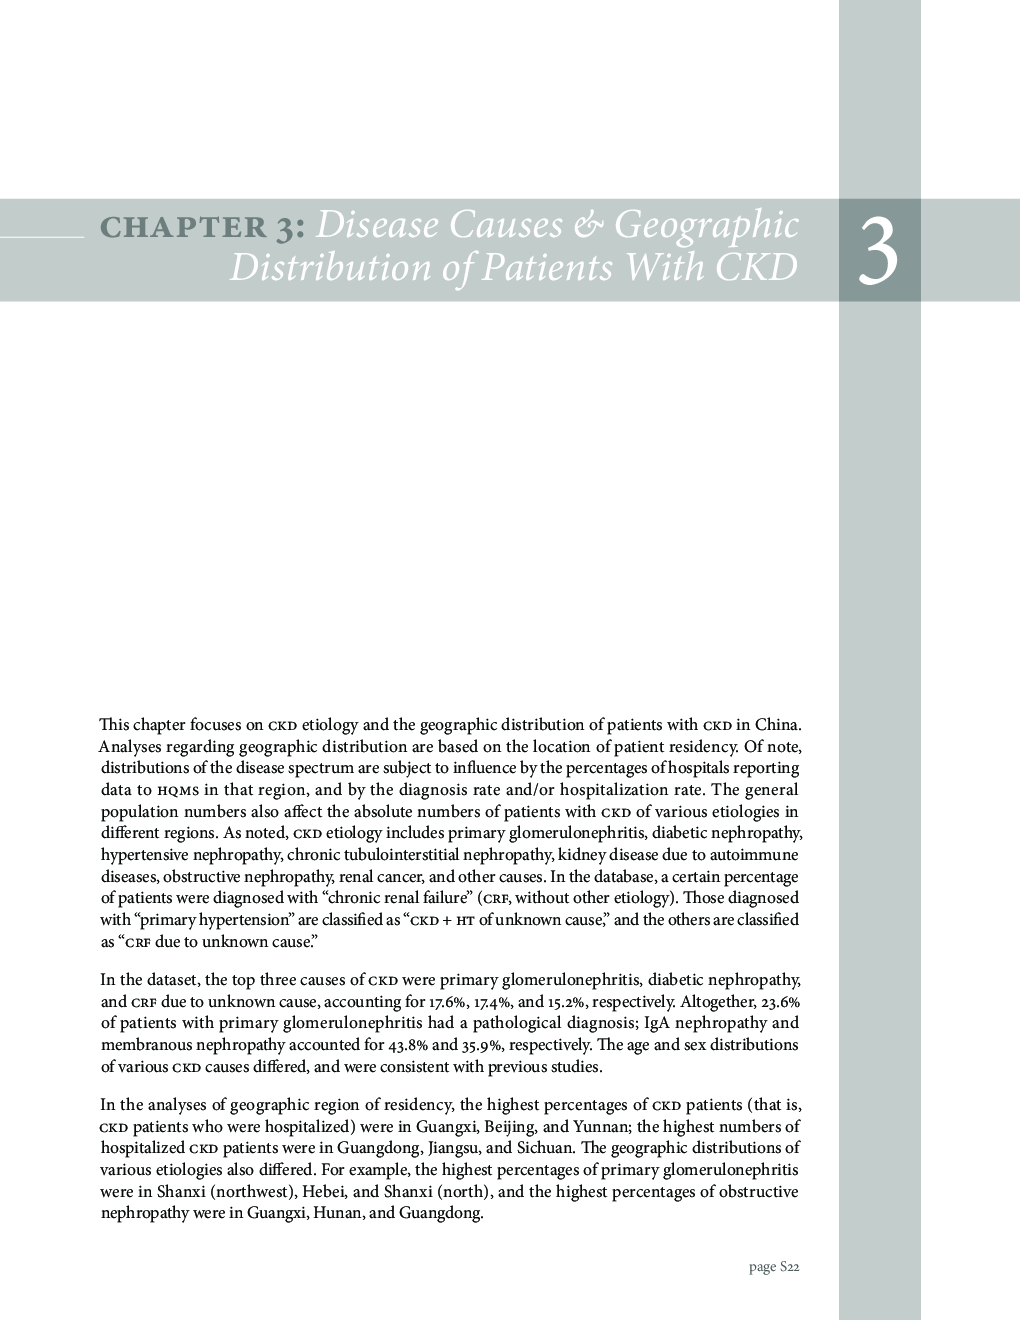 Chapter 3: Disease Causes & Geographic Distribution of Patients With CKD